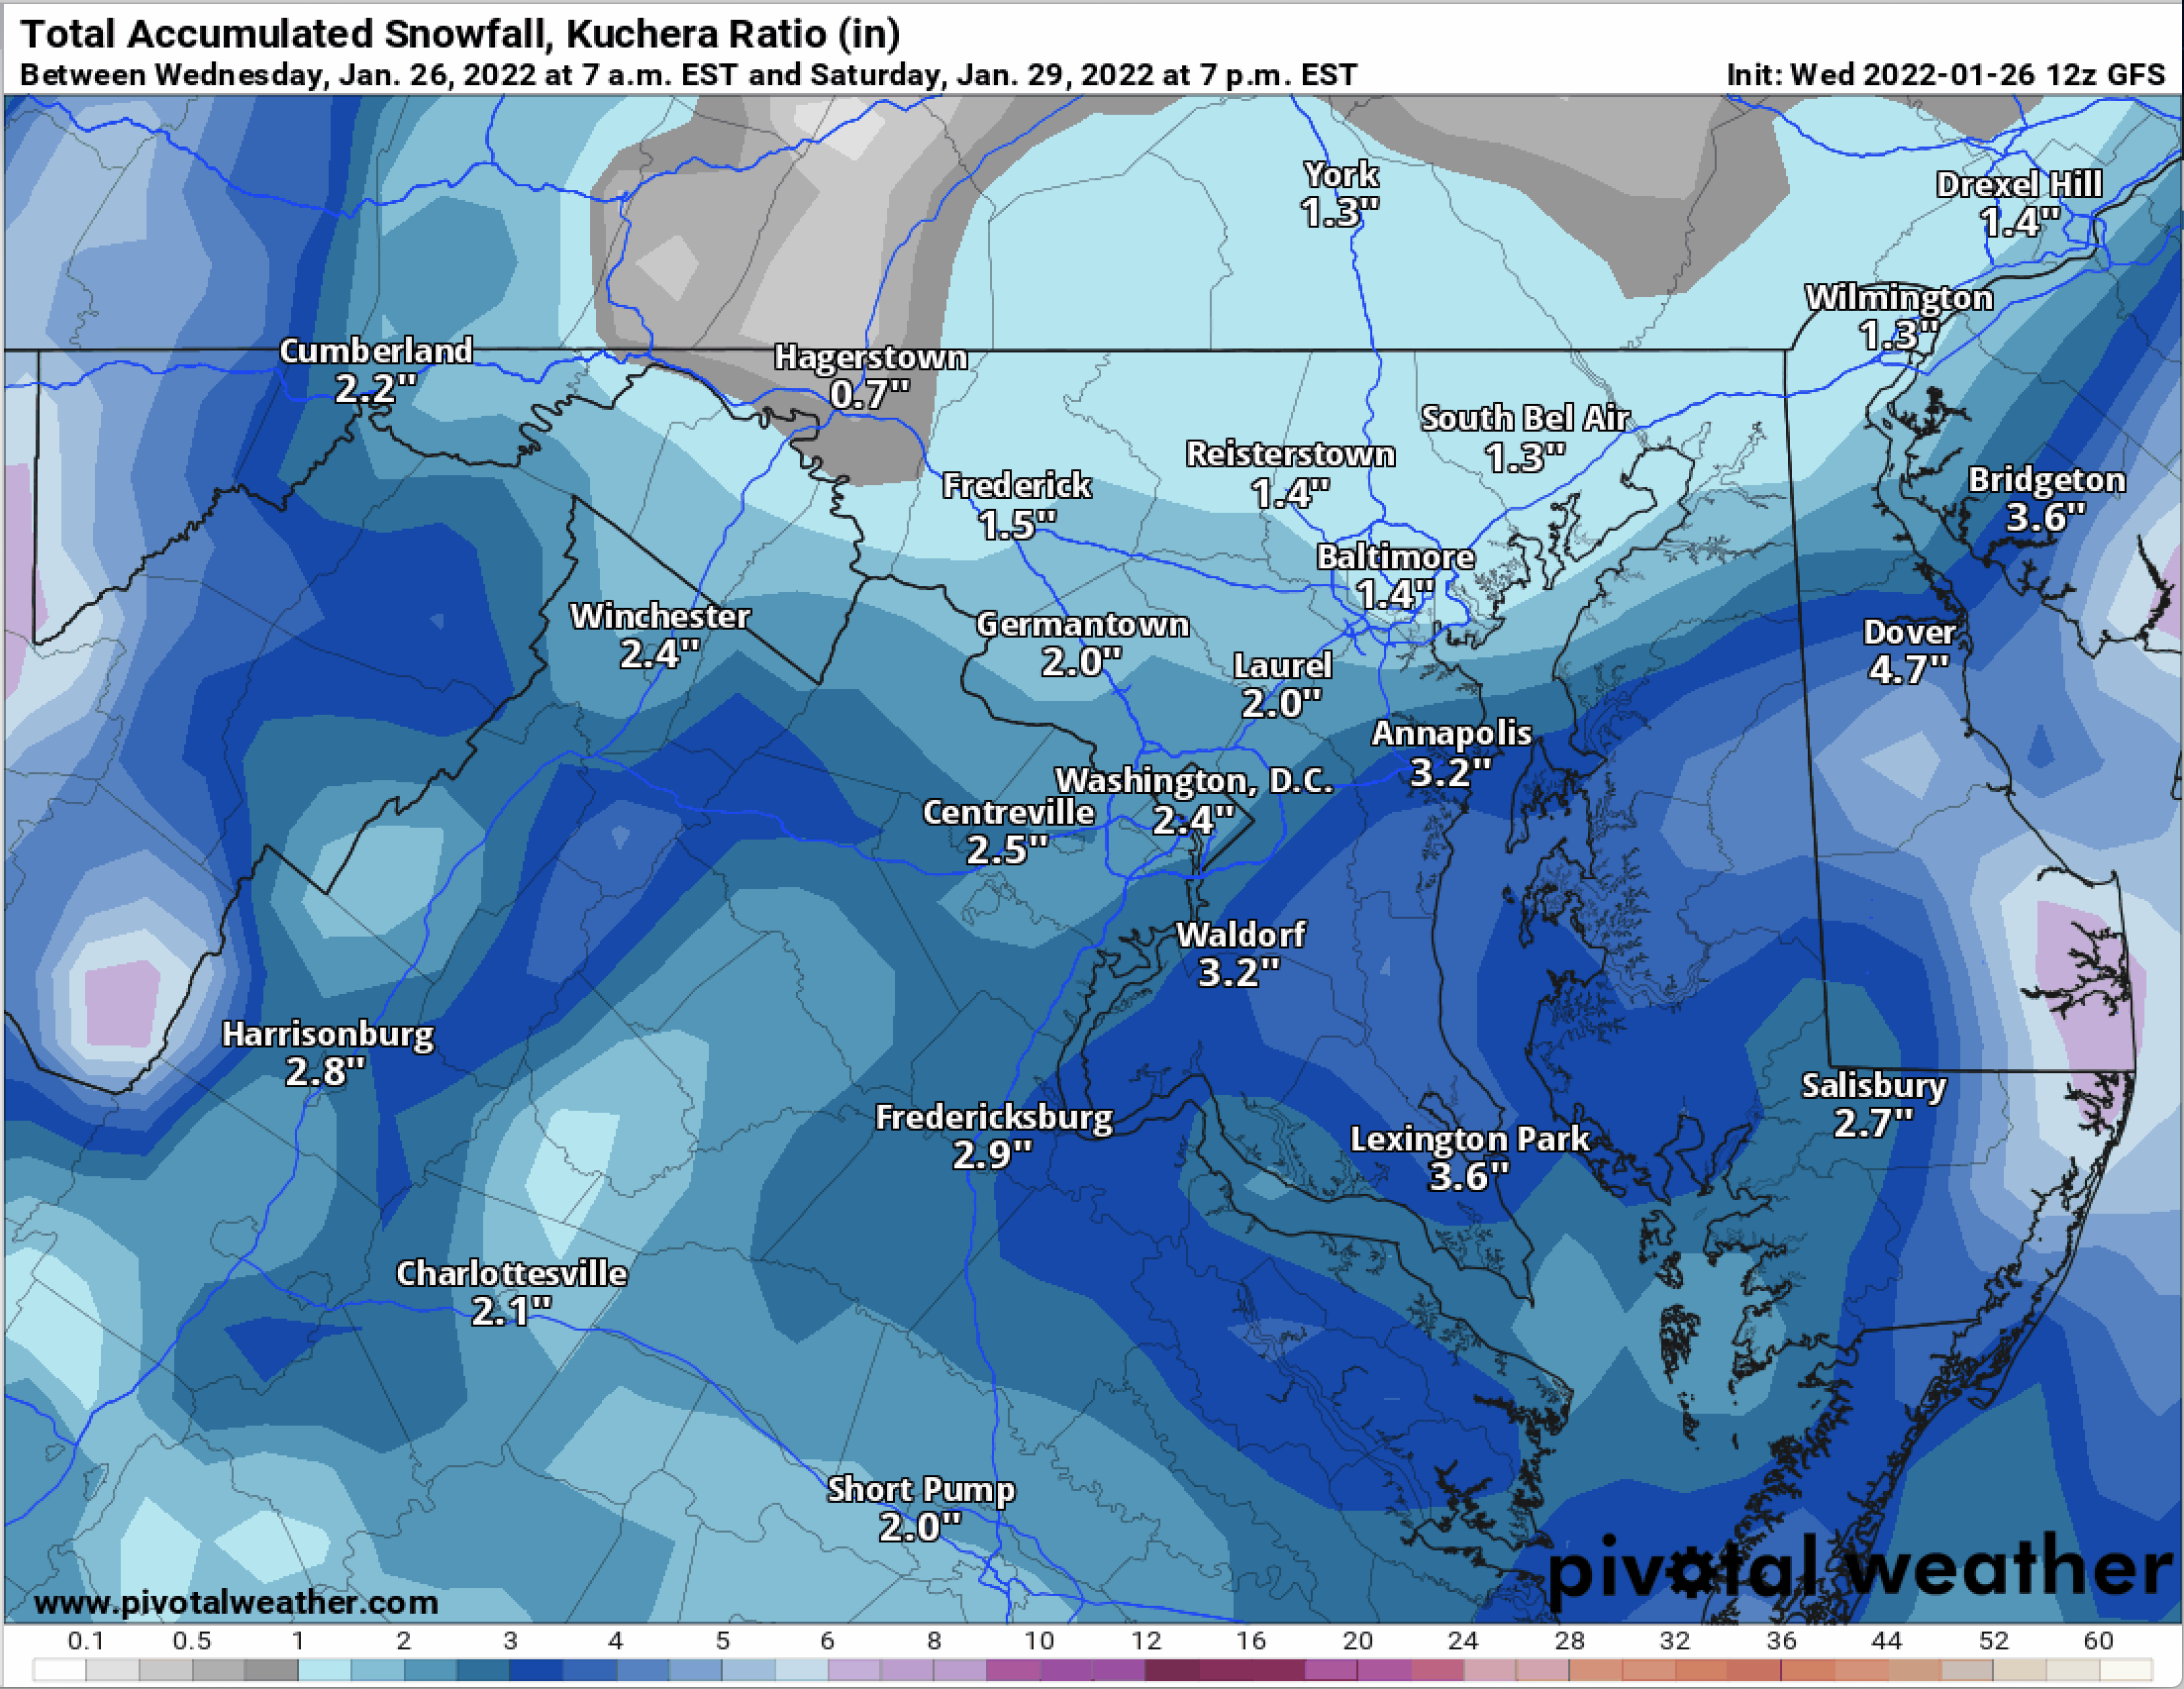 Friday Snow Threat Update: Glancing hit likely – heaviest snowfall east